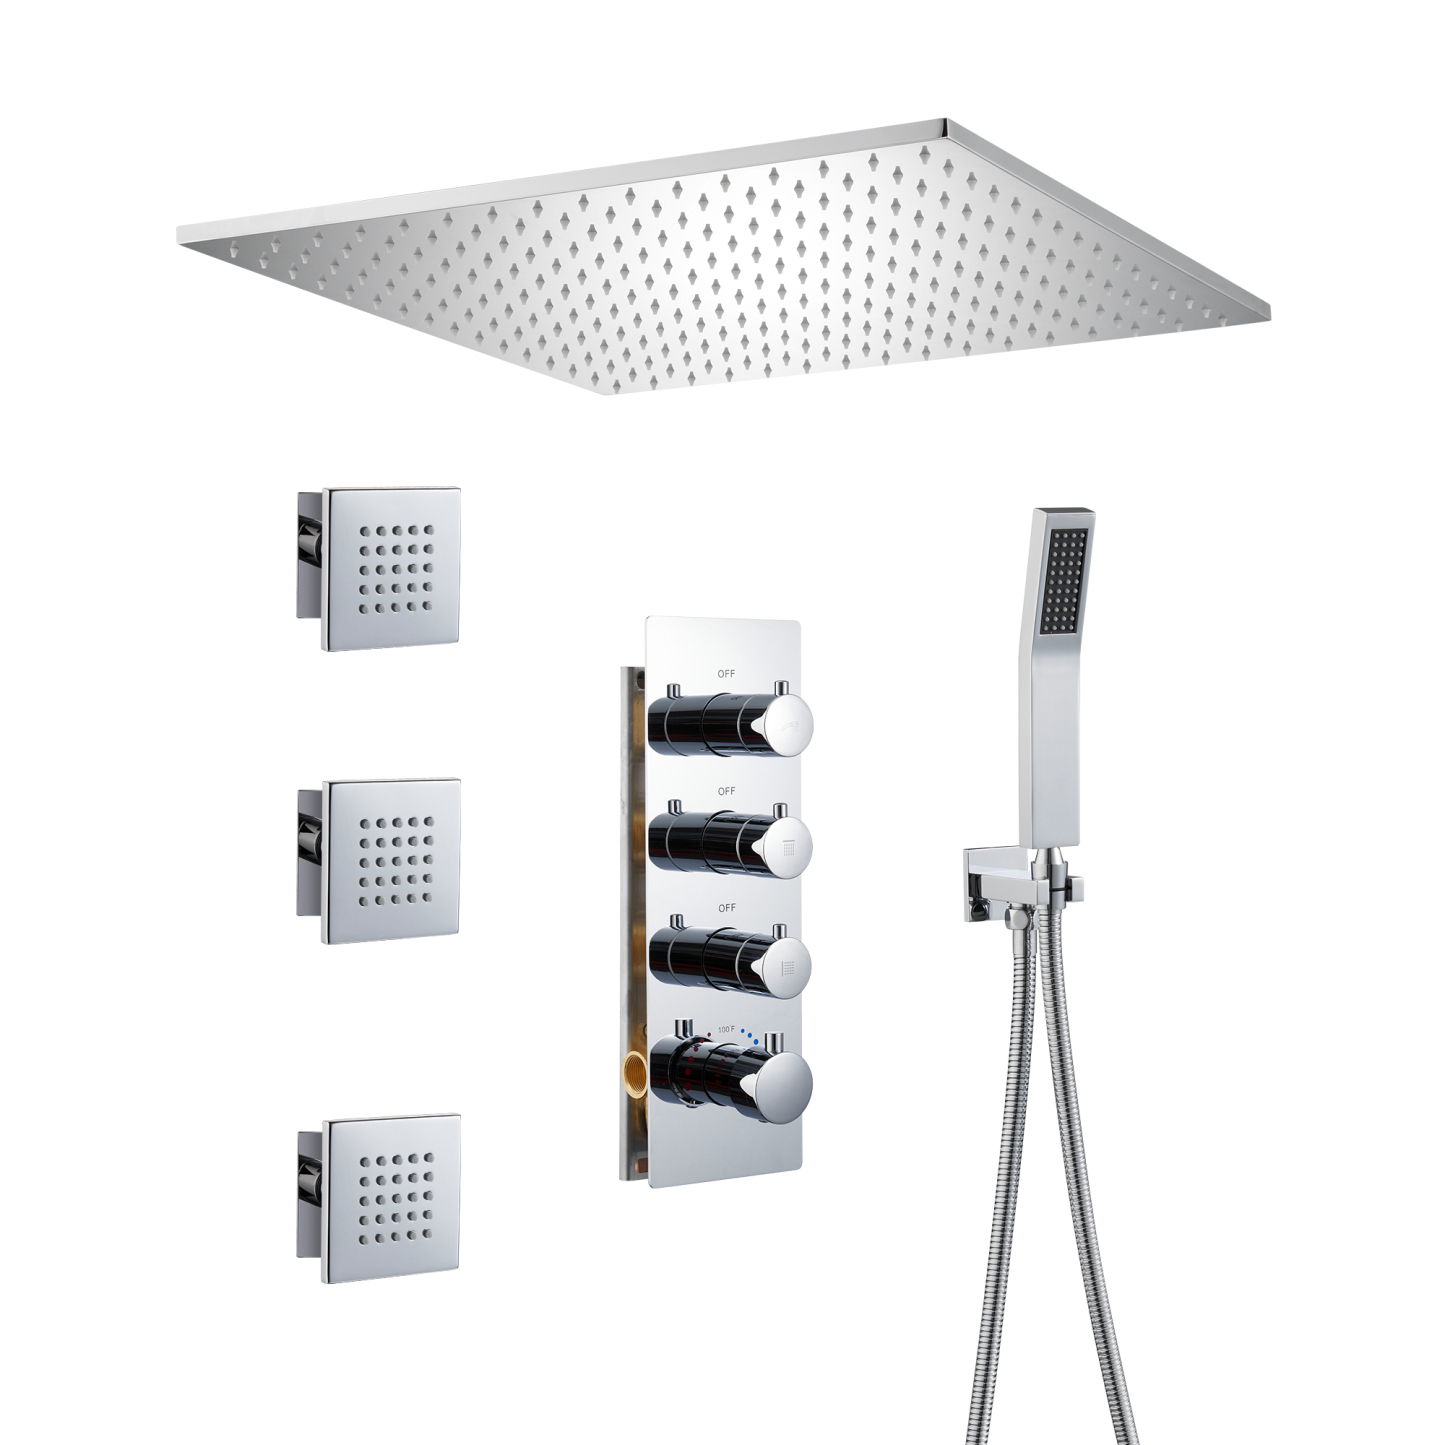 20 Inch Ceiling Mounted Rain Shower Head System Luxury 3-Spray Patterns Thermostatic Shower Faucets Sets Complete with 3-Function Shower Head and Solid Brass Handshower-Mondawe